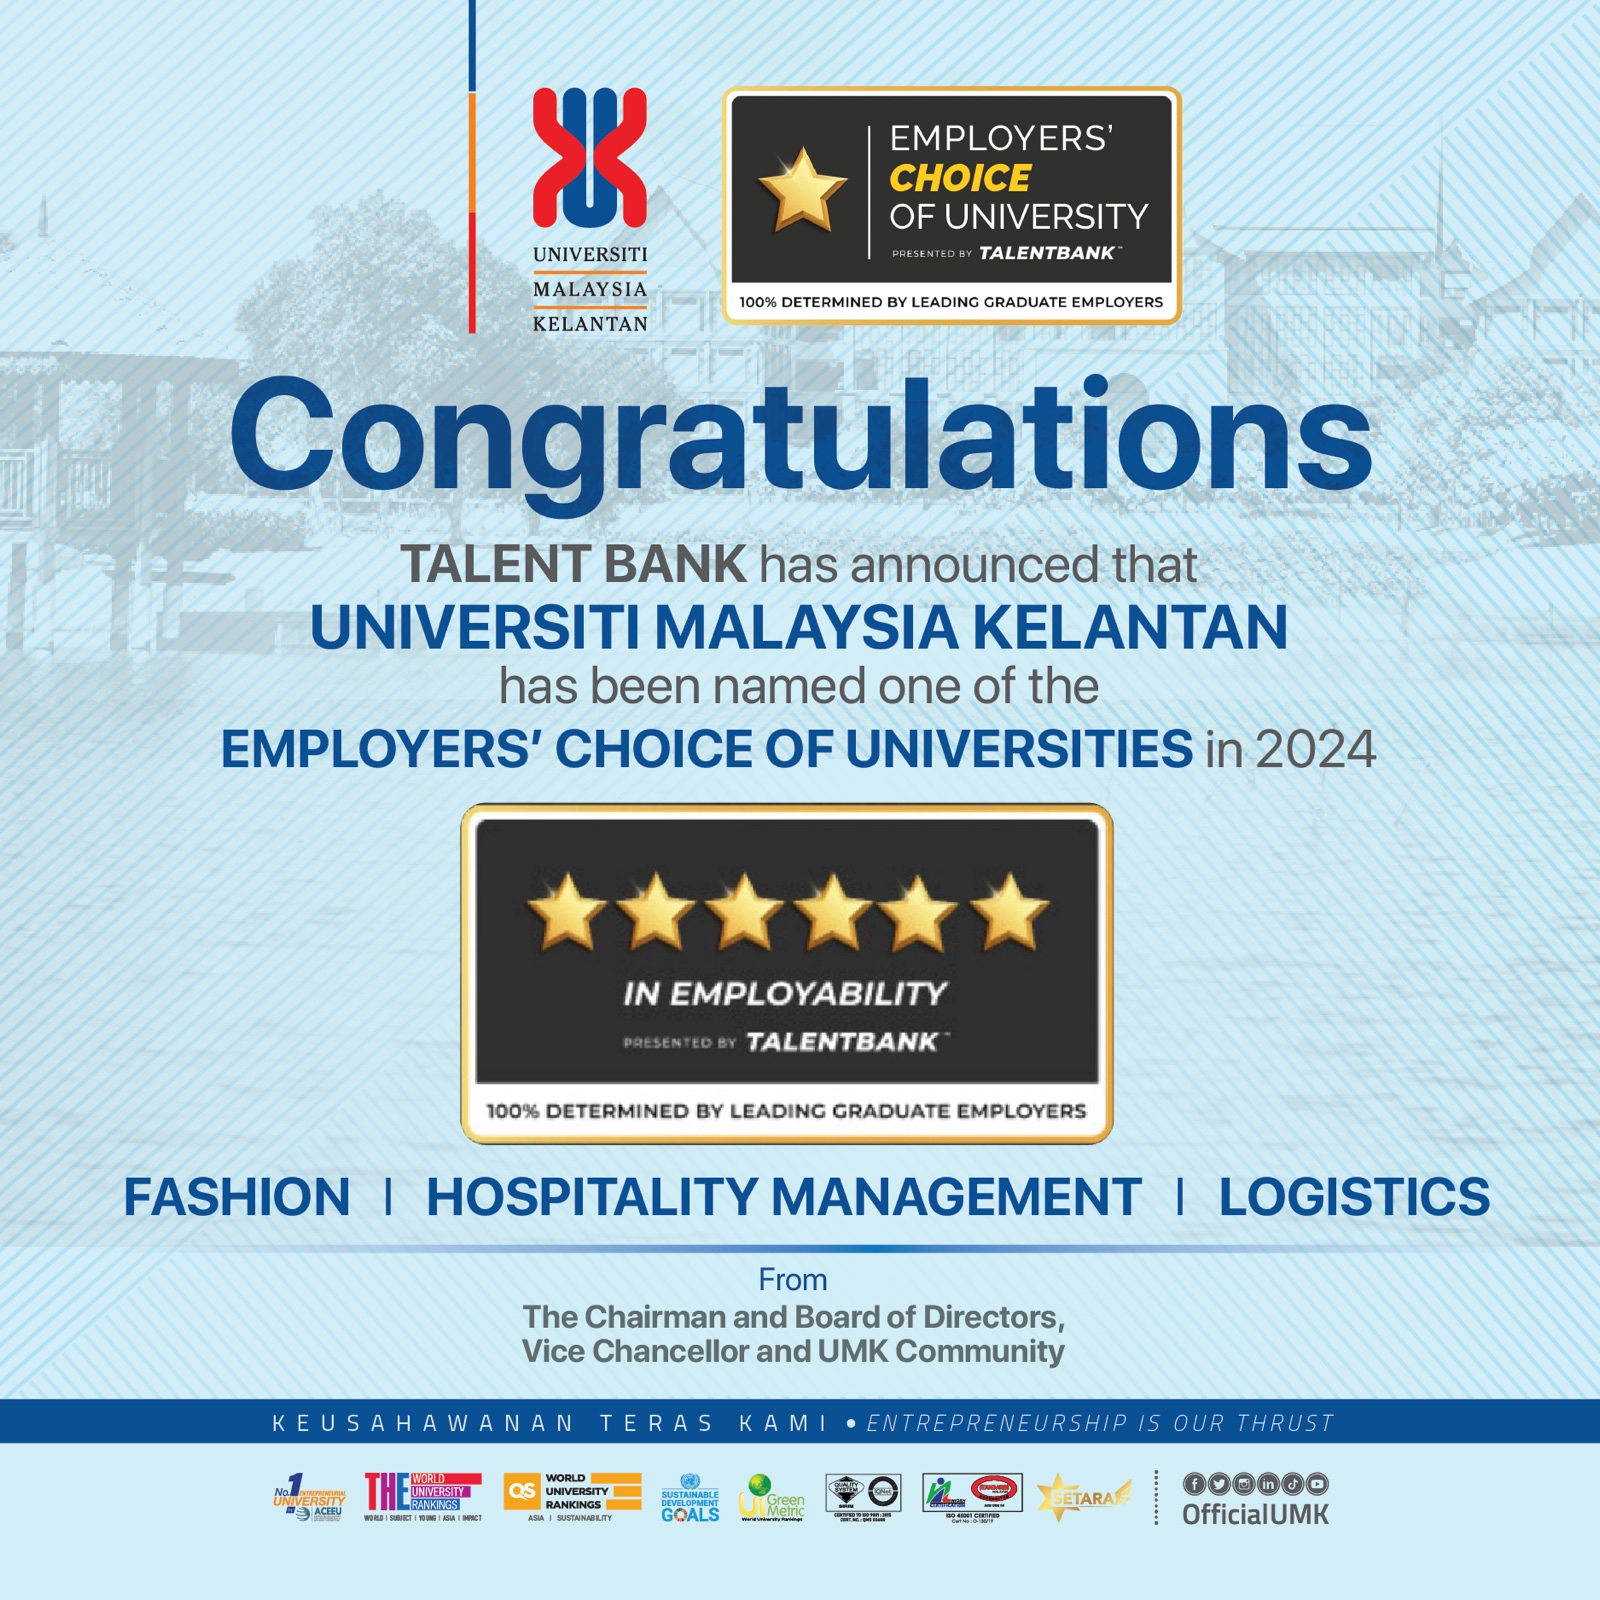 The Best Employer's Choice of University in 2024